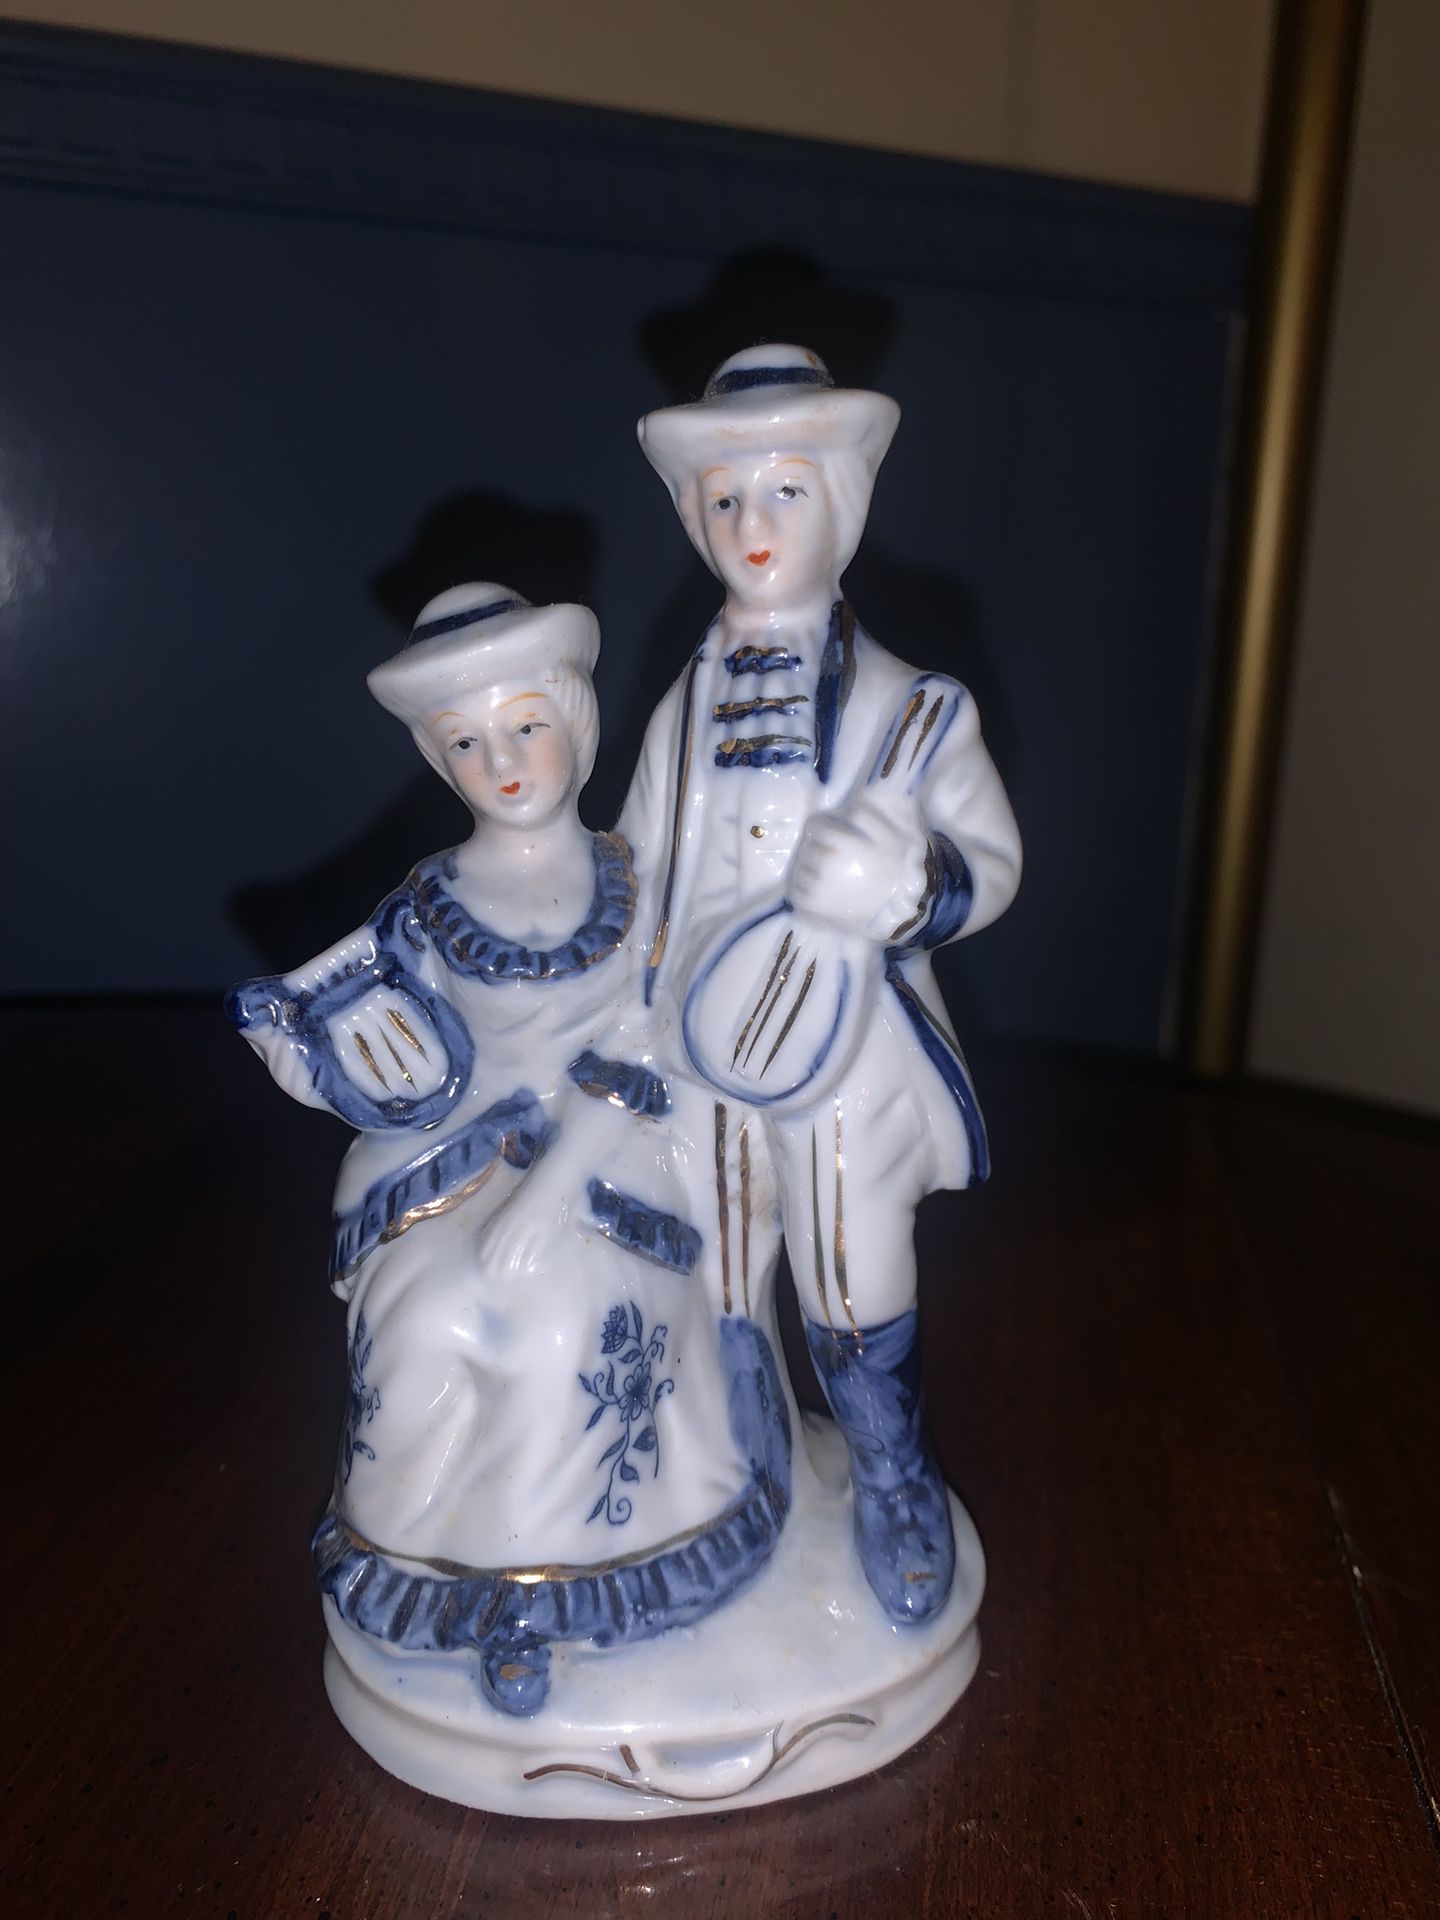 Vintage Porcelain Couple Courting Figurine Statue Sculpture | Blue and White Porcelain Doll Figurine